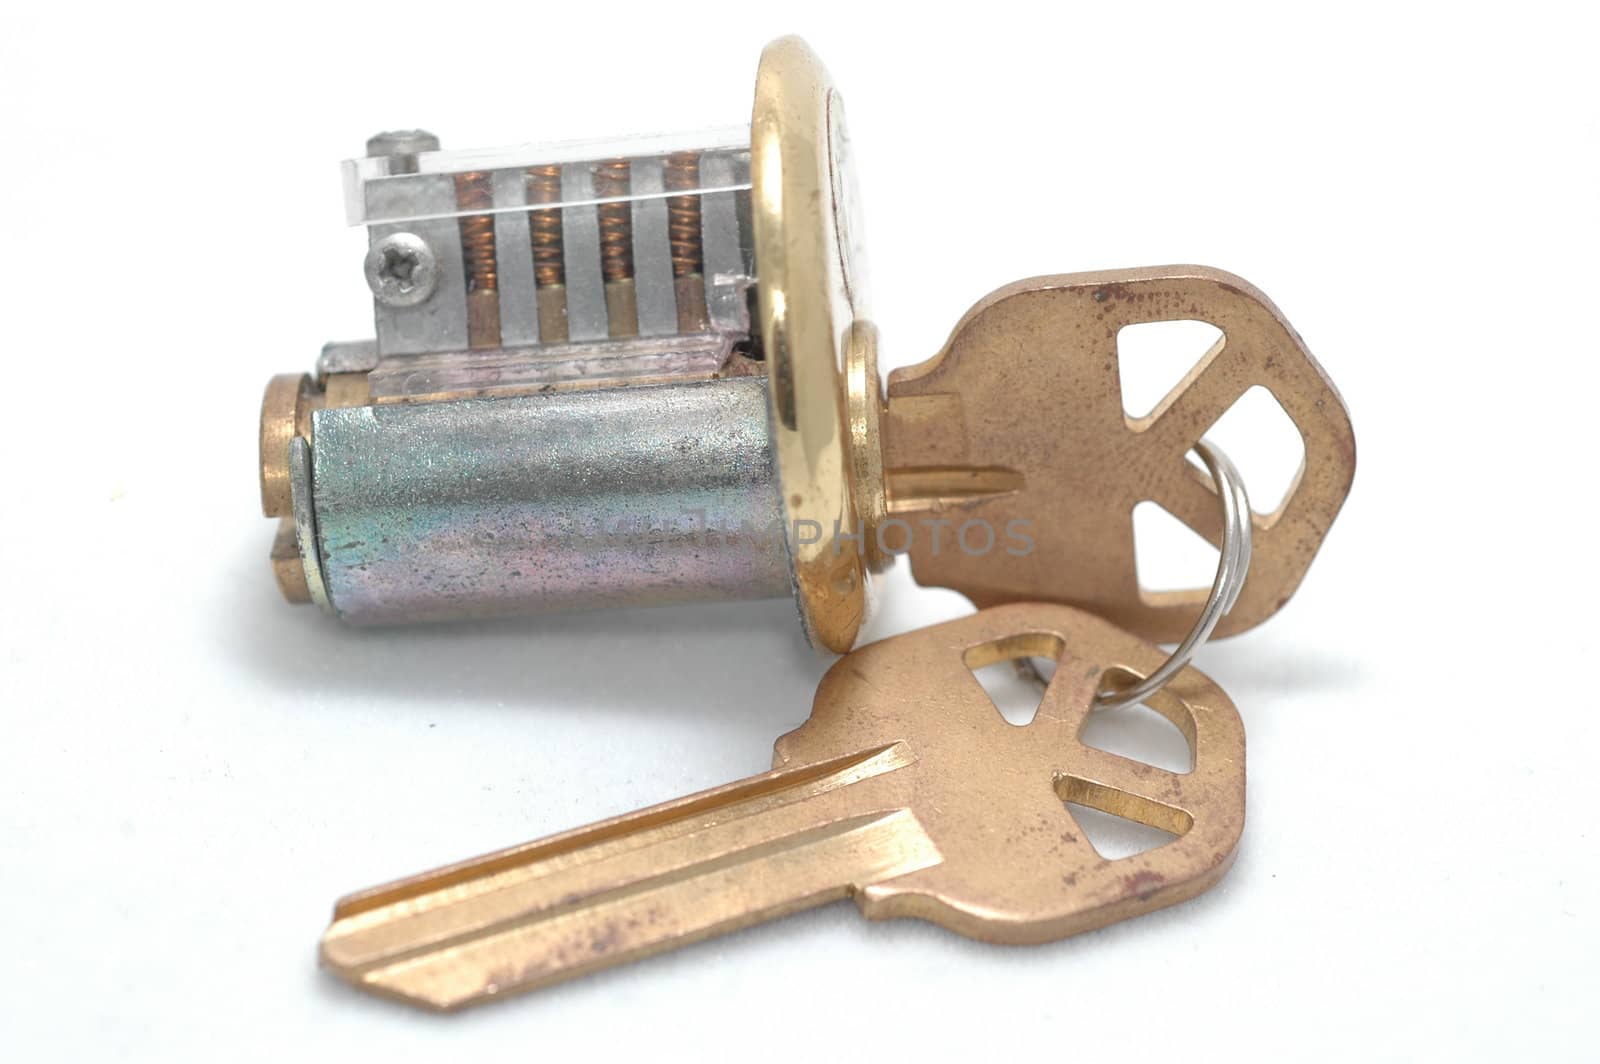 Cutaway pin-tumbler lock with the correct key inserted